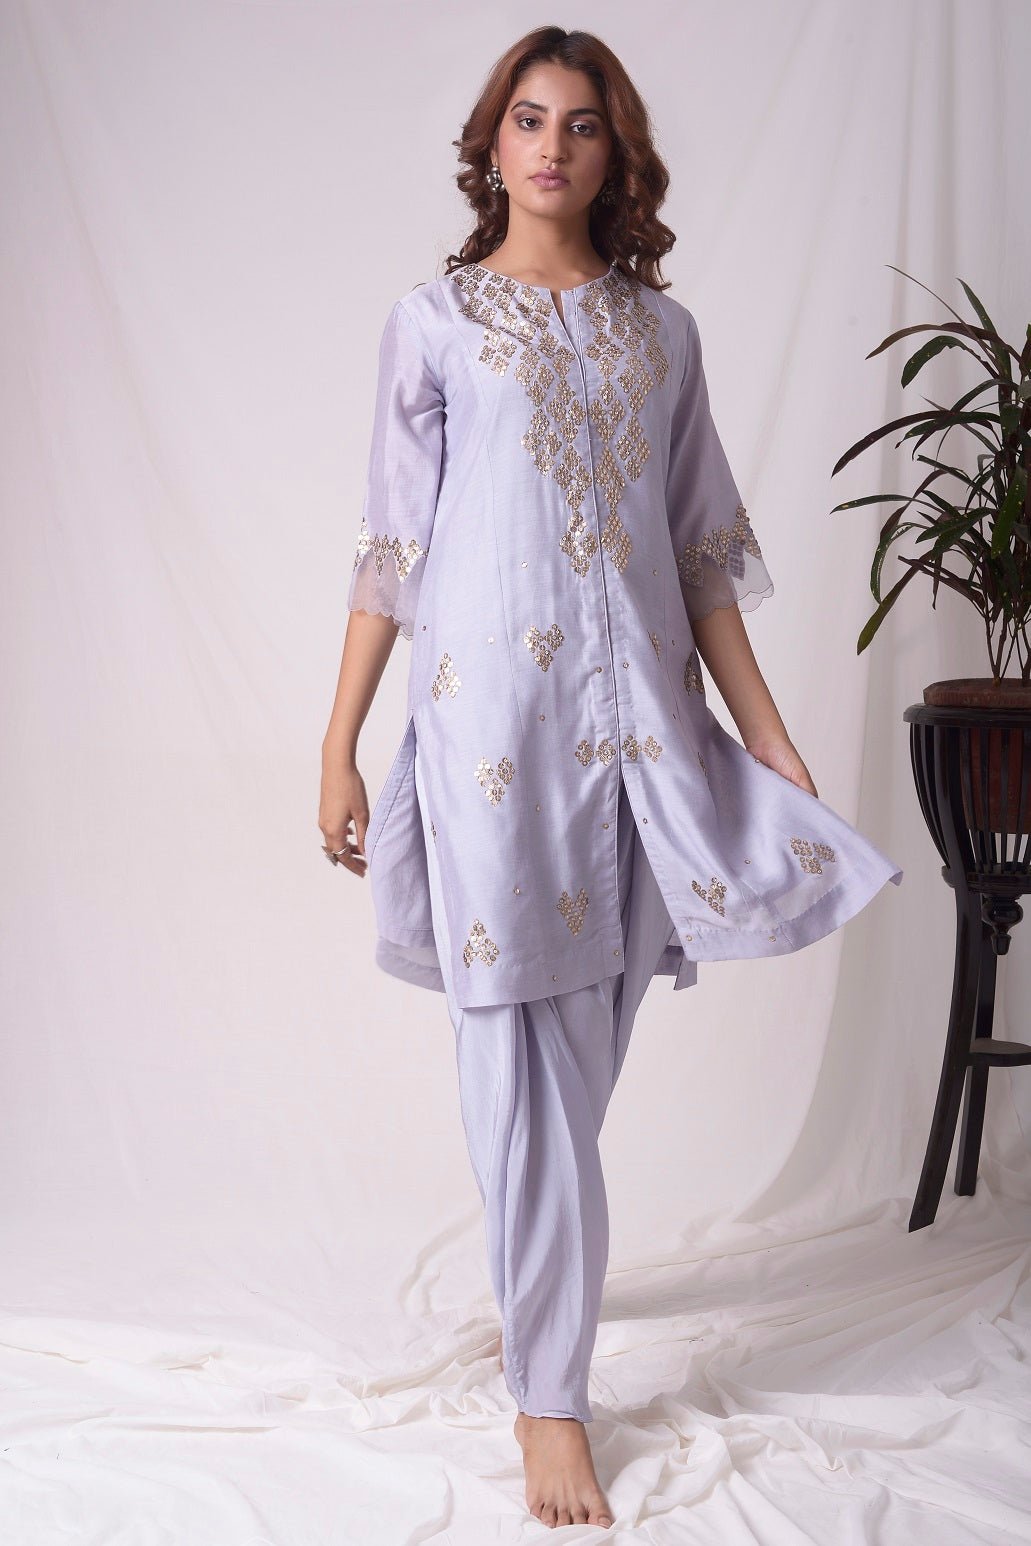 Buy lavender embroidered chanderi suit online in USA. Suit has simple golden work. Kurta has 3/4 length sleeves with net like at border, dhoti and rhombus neckline. Simple look makes it elegant. Be the talk of parties and weddings with exquisite designer gowns from Pure Elegance Indian clothing store in USA. Shop online now.-full view-2